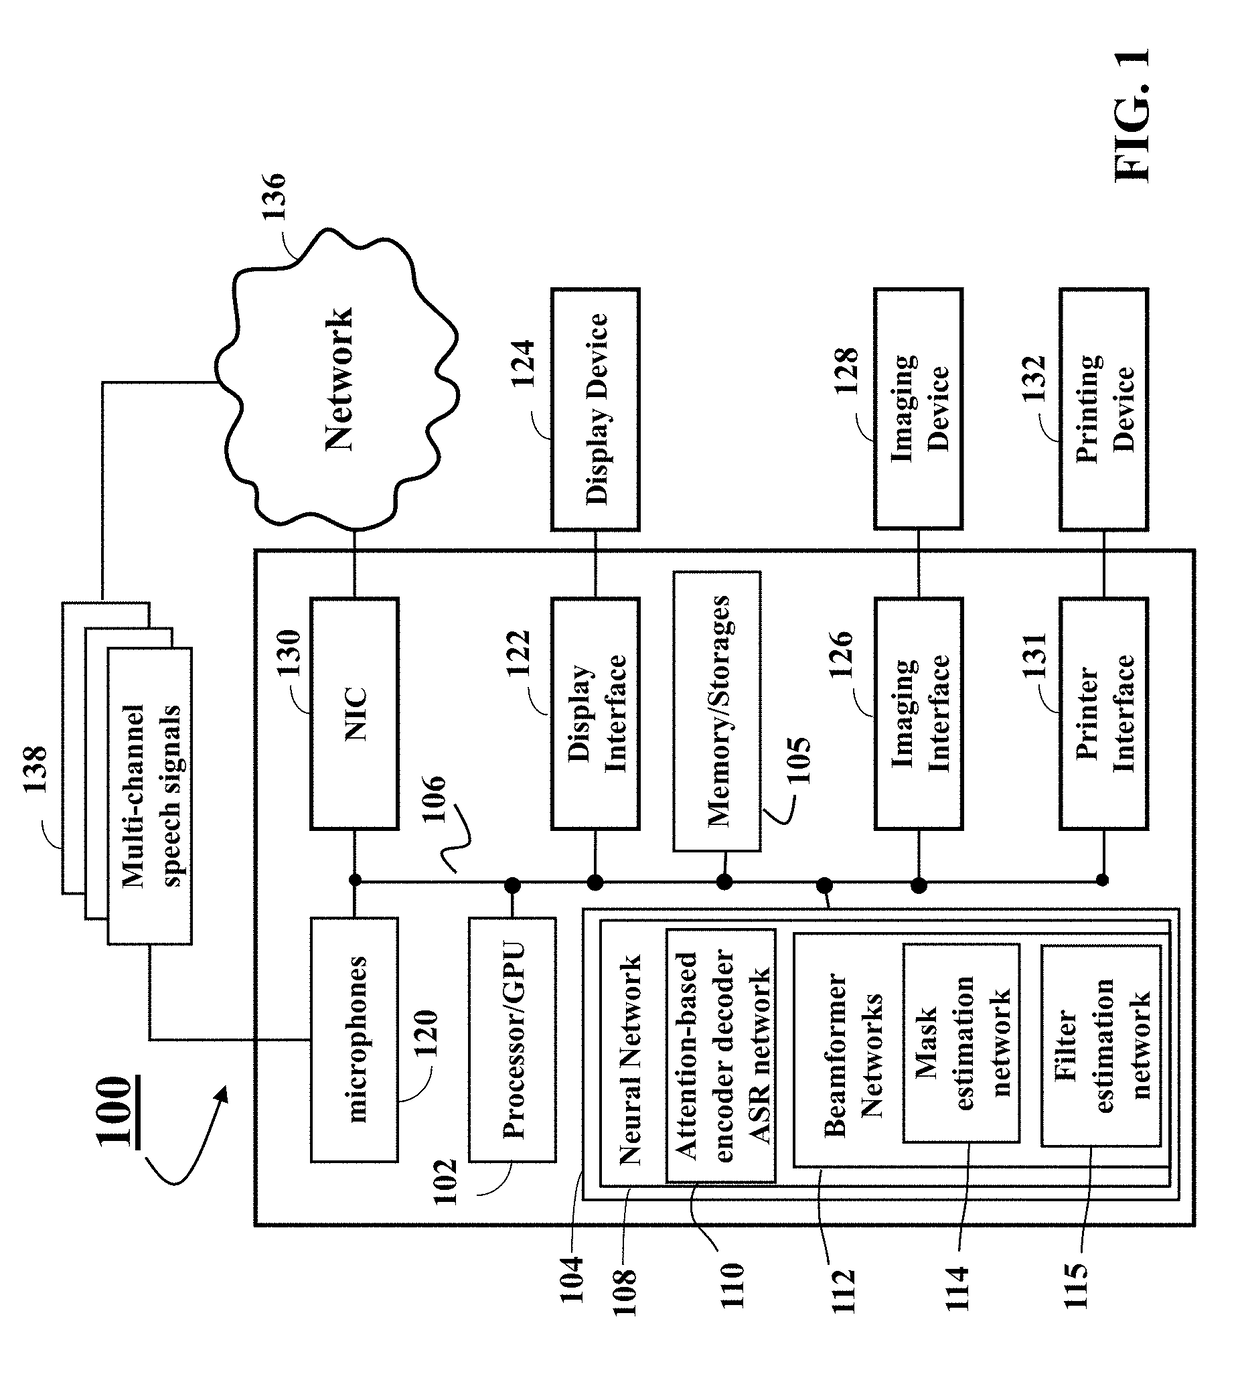 System and Method for Multichannel End-to-End Speech Recognition